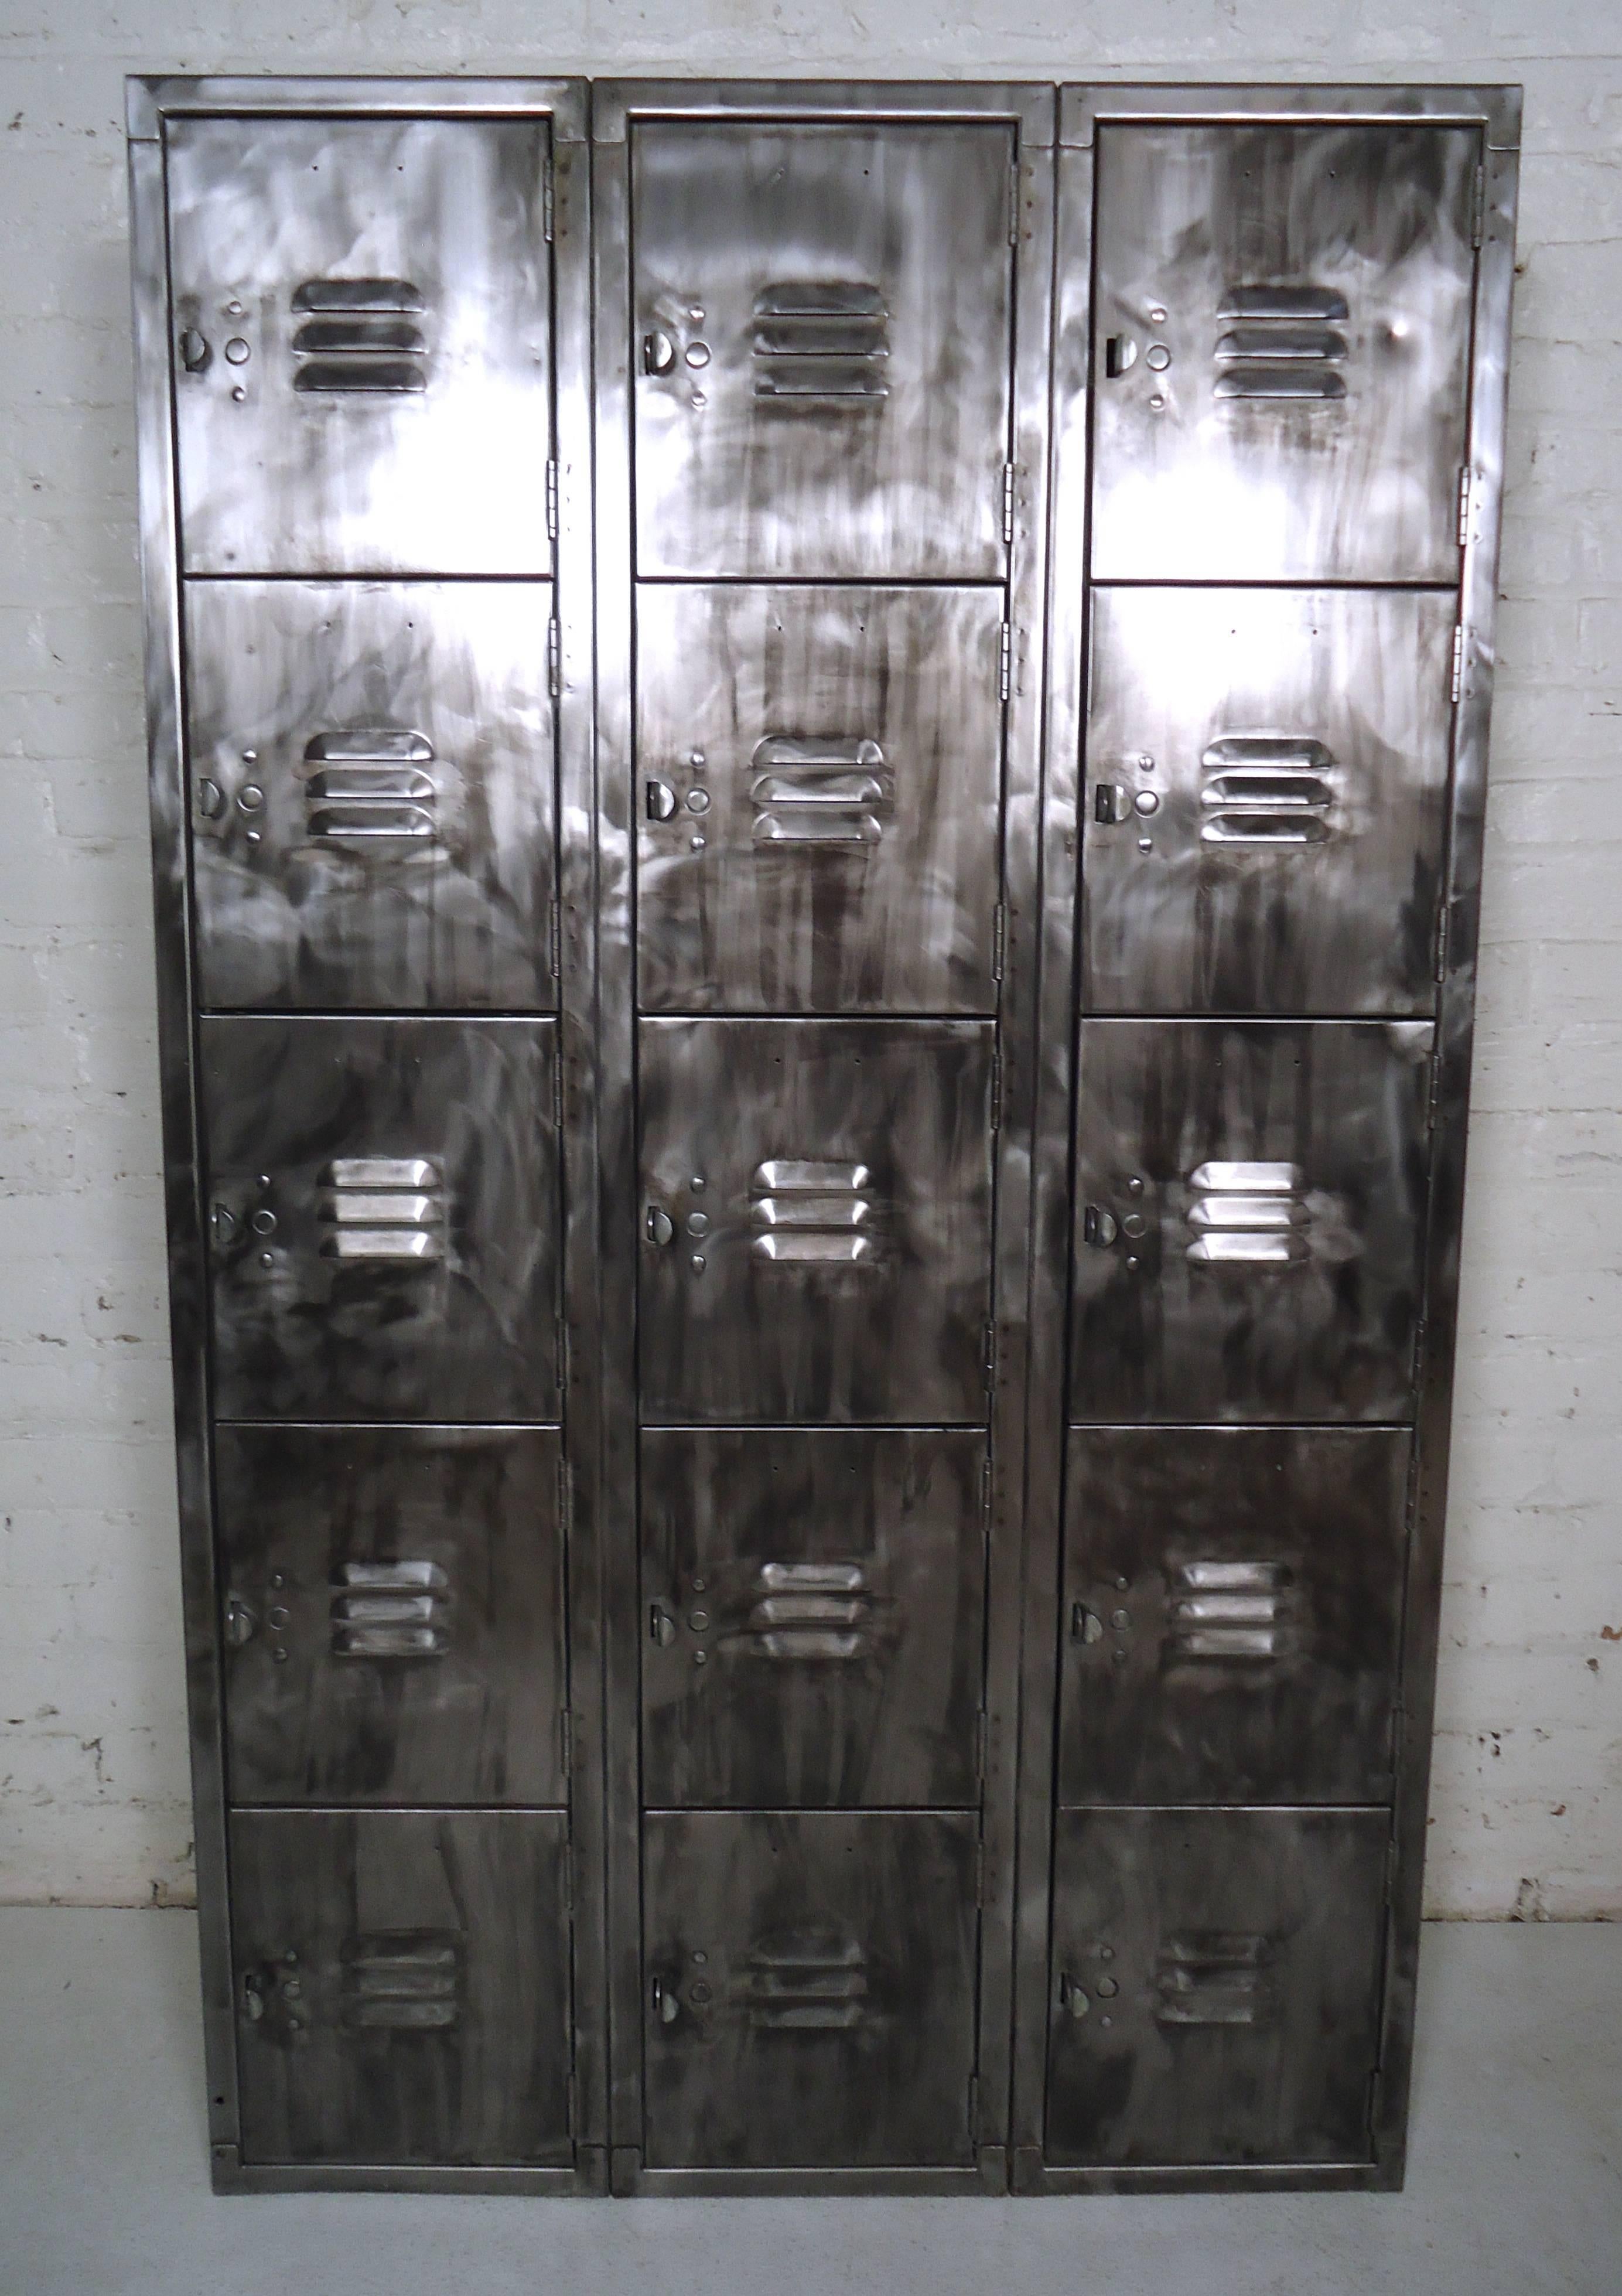 Industrial style metal locker unit with fifteen compartments. Each locker has spacious room and vents. Great storage for kitchen or entry way in your modern home.

(Please confirm item location - NY or NJ - with dealer).